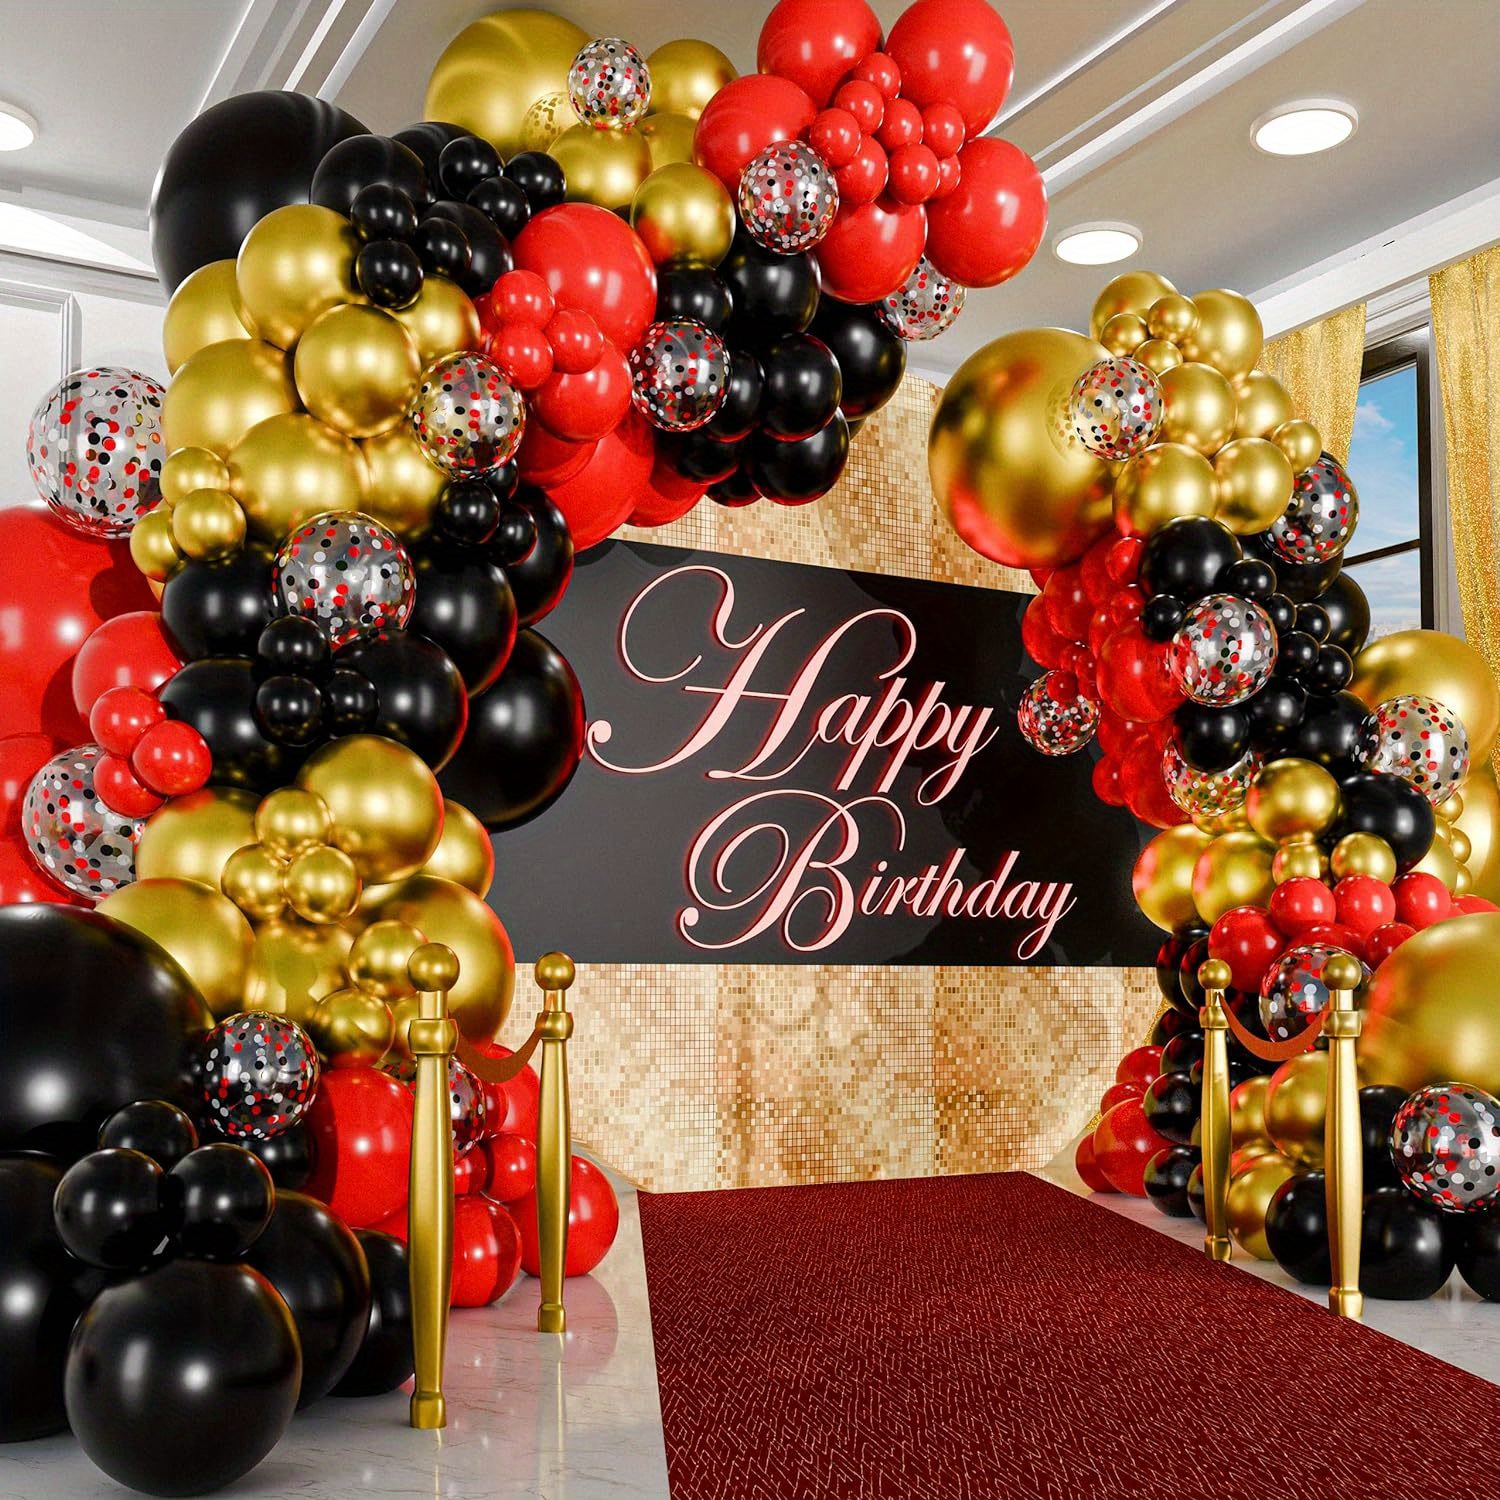 

109-piece Luxe Red, Black & Metallic Balloon Garland Kit - Ideal For Casino Theme Events, Birthdays, Graduations & More - Sturdy Latex Balloons For Indoor Celebrations Balloon Decoration Set